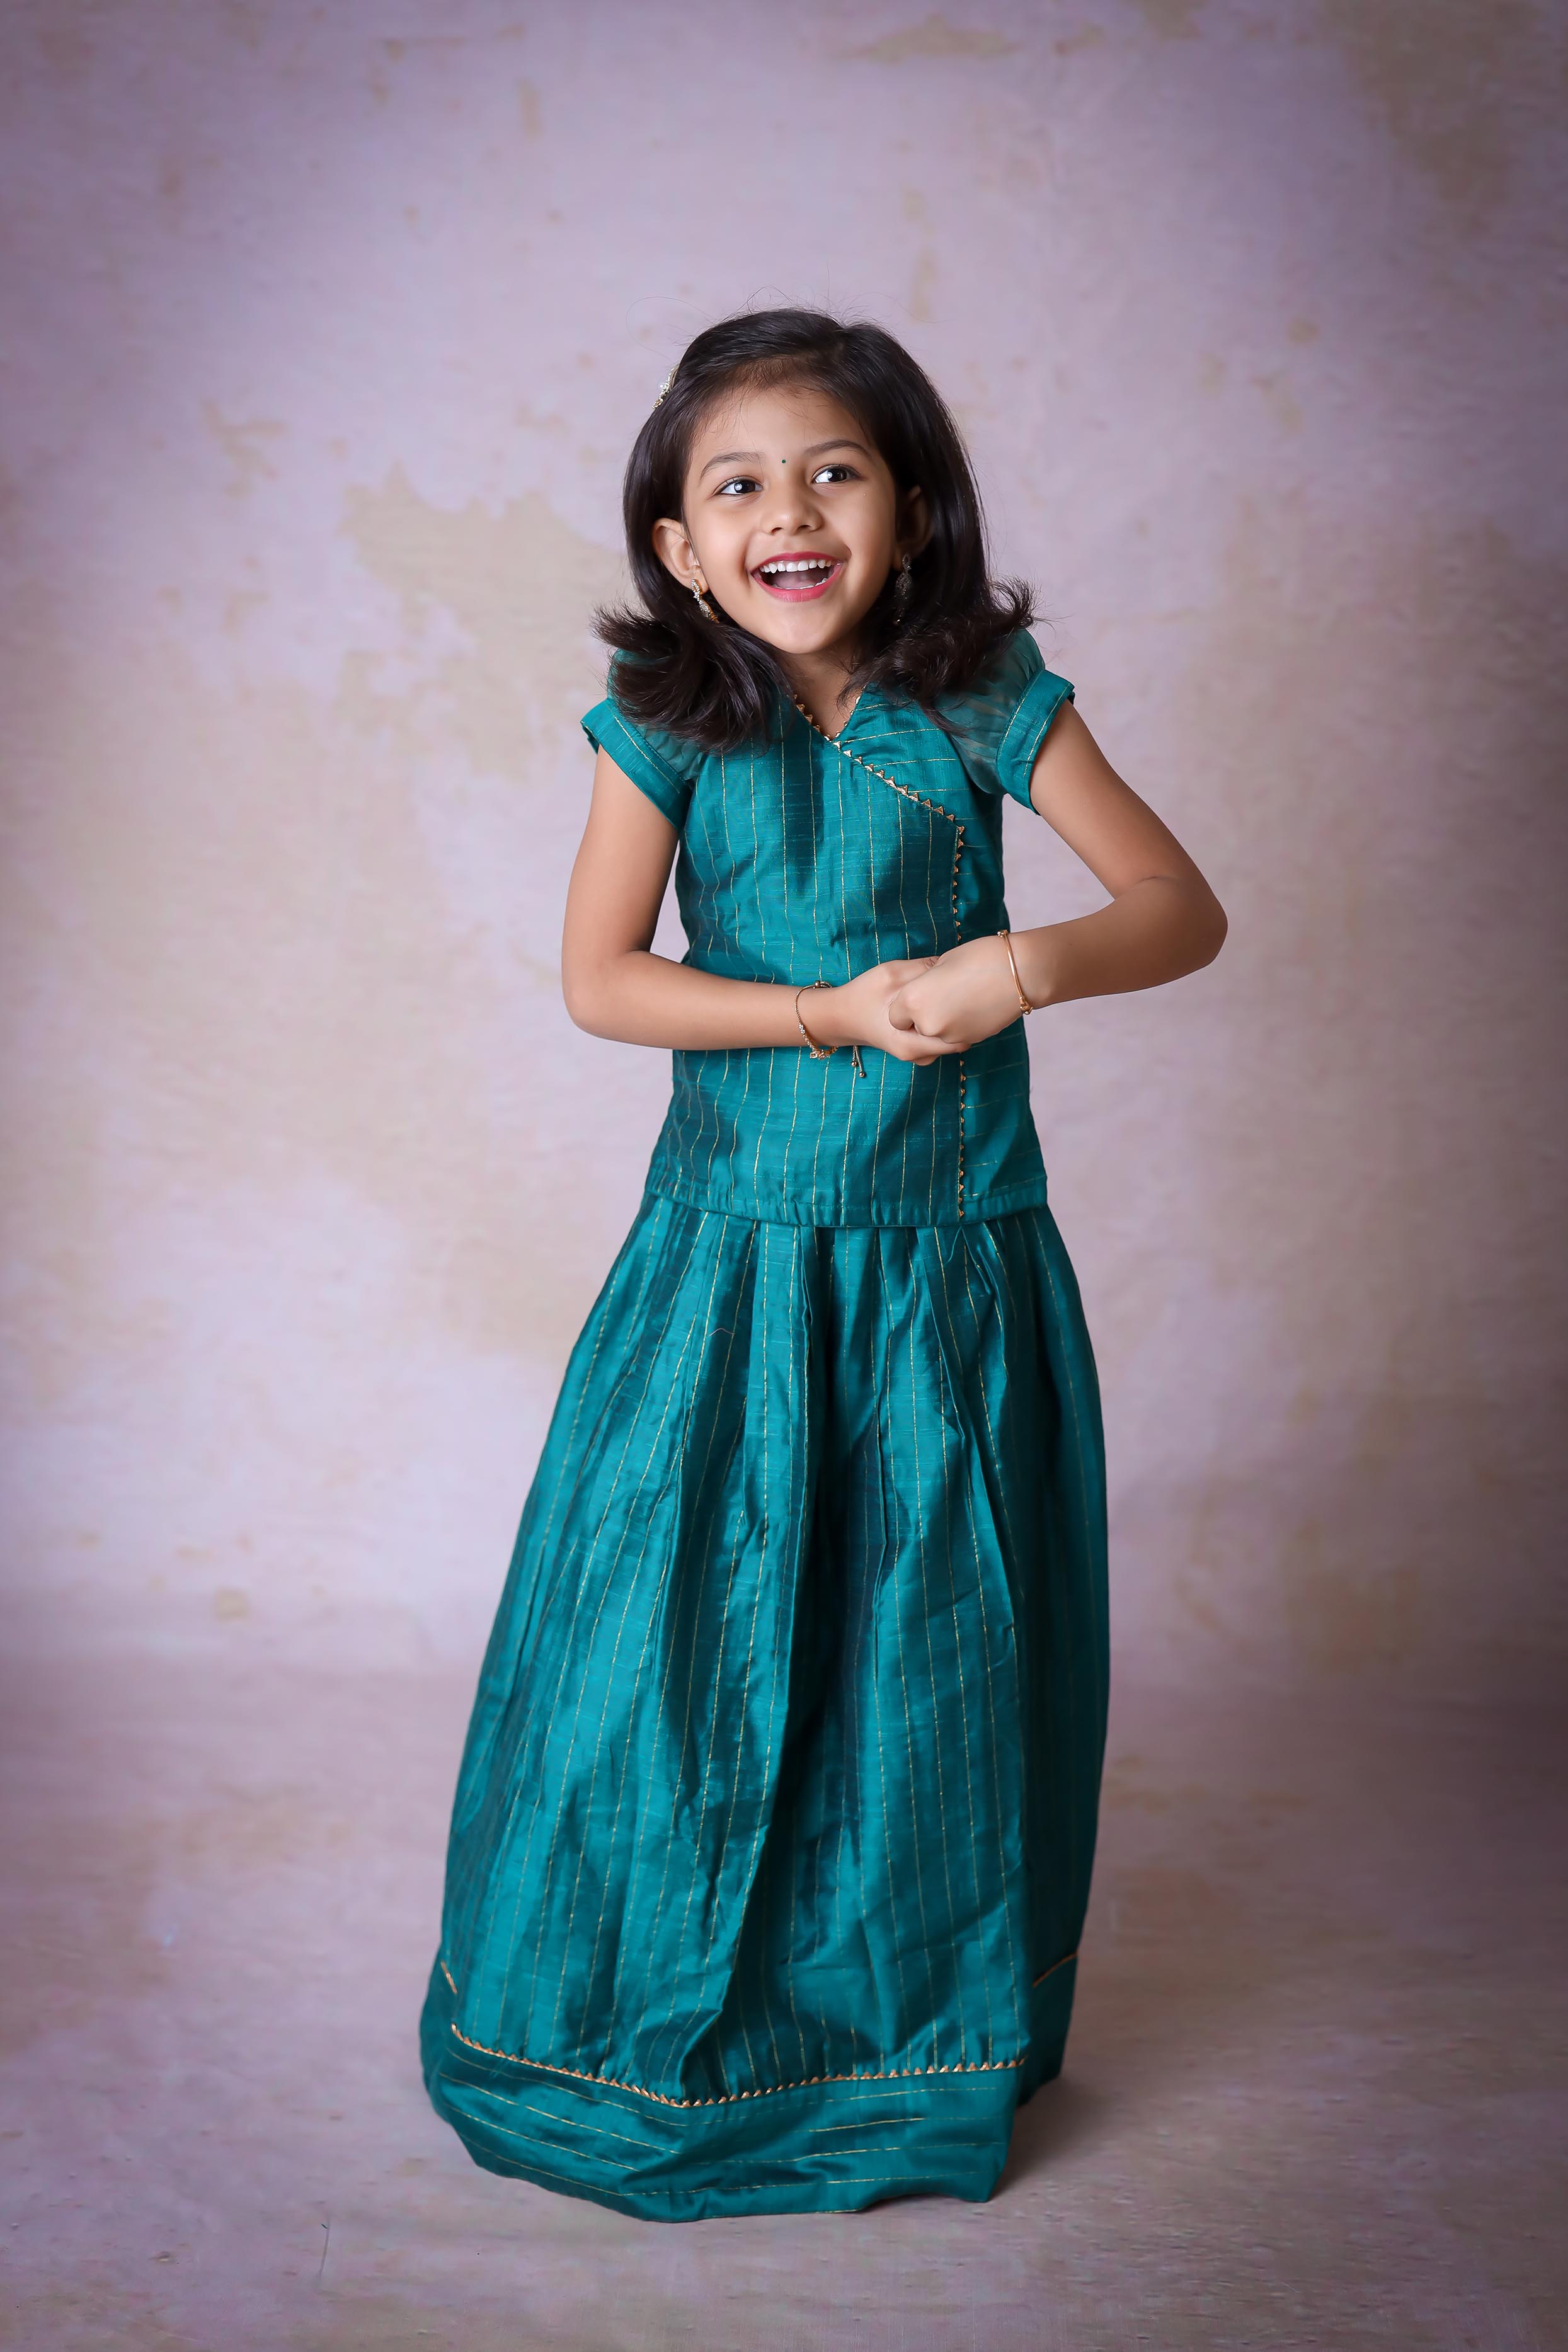 Shop adorable traditional Indian outfits for baby girls like this chanderi cotton dress. The perfect first birthday gift or baby shower present for new moms.